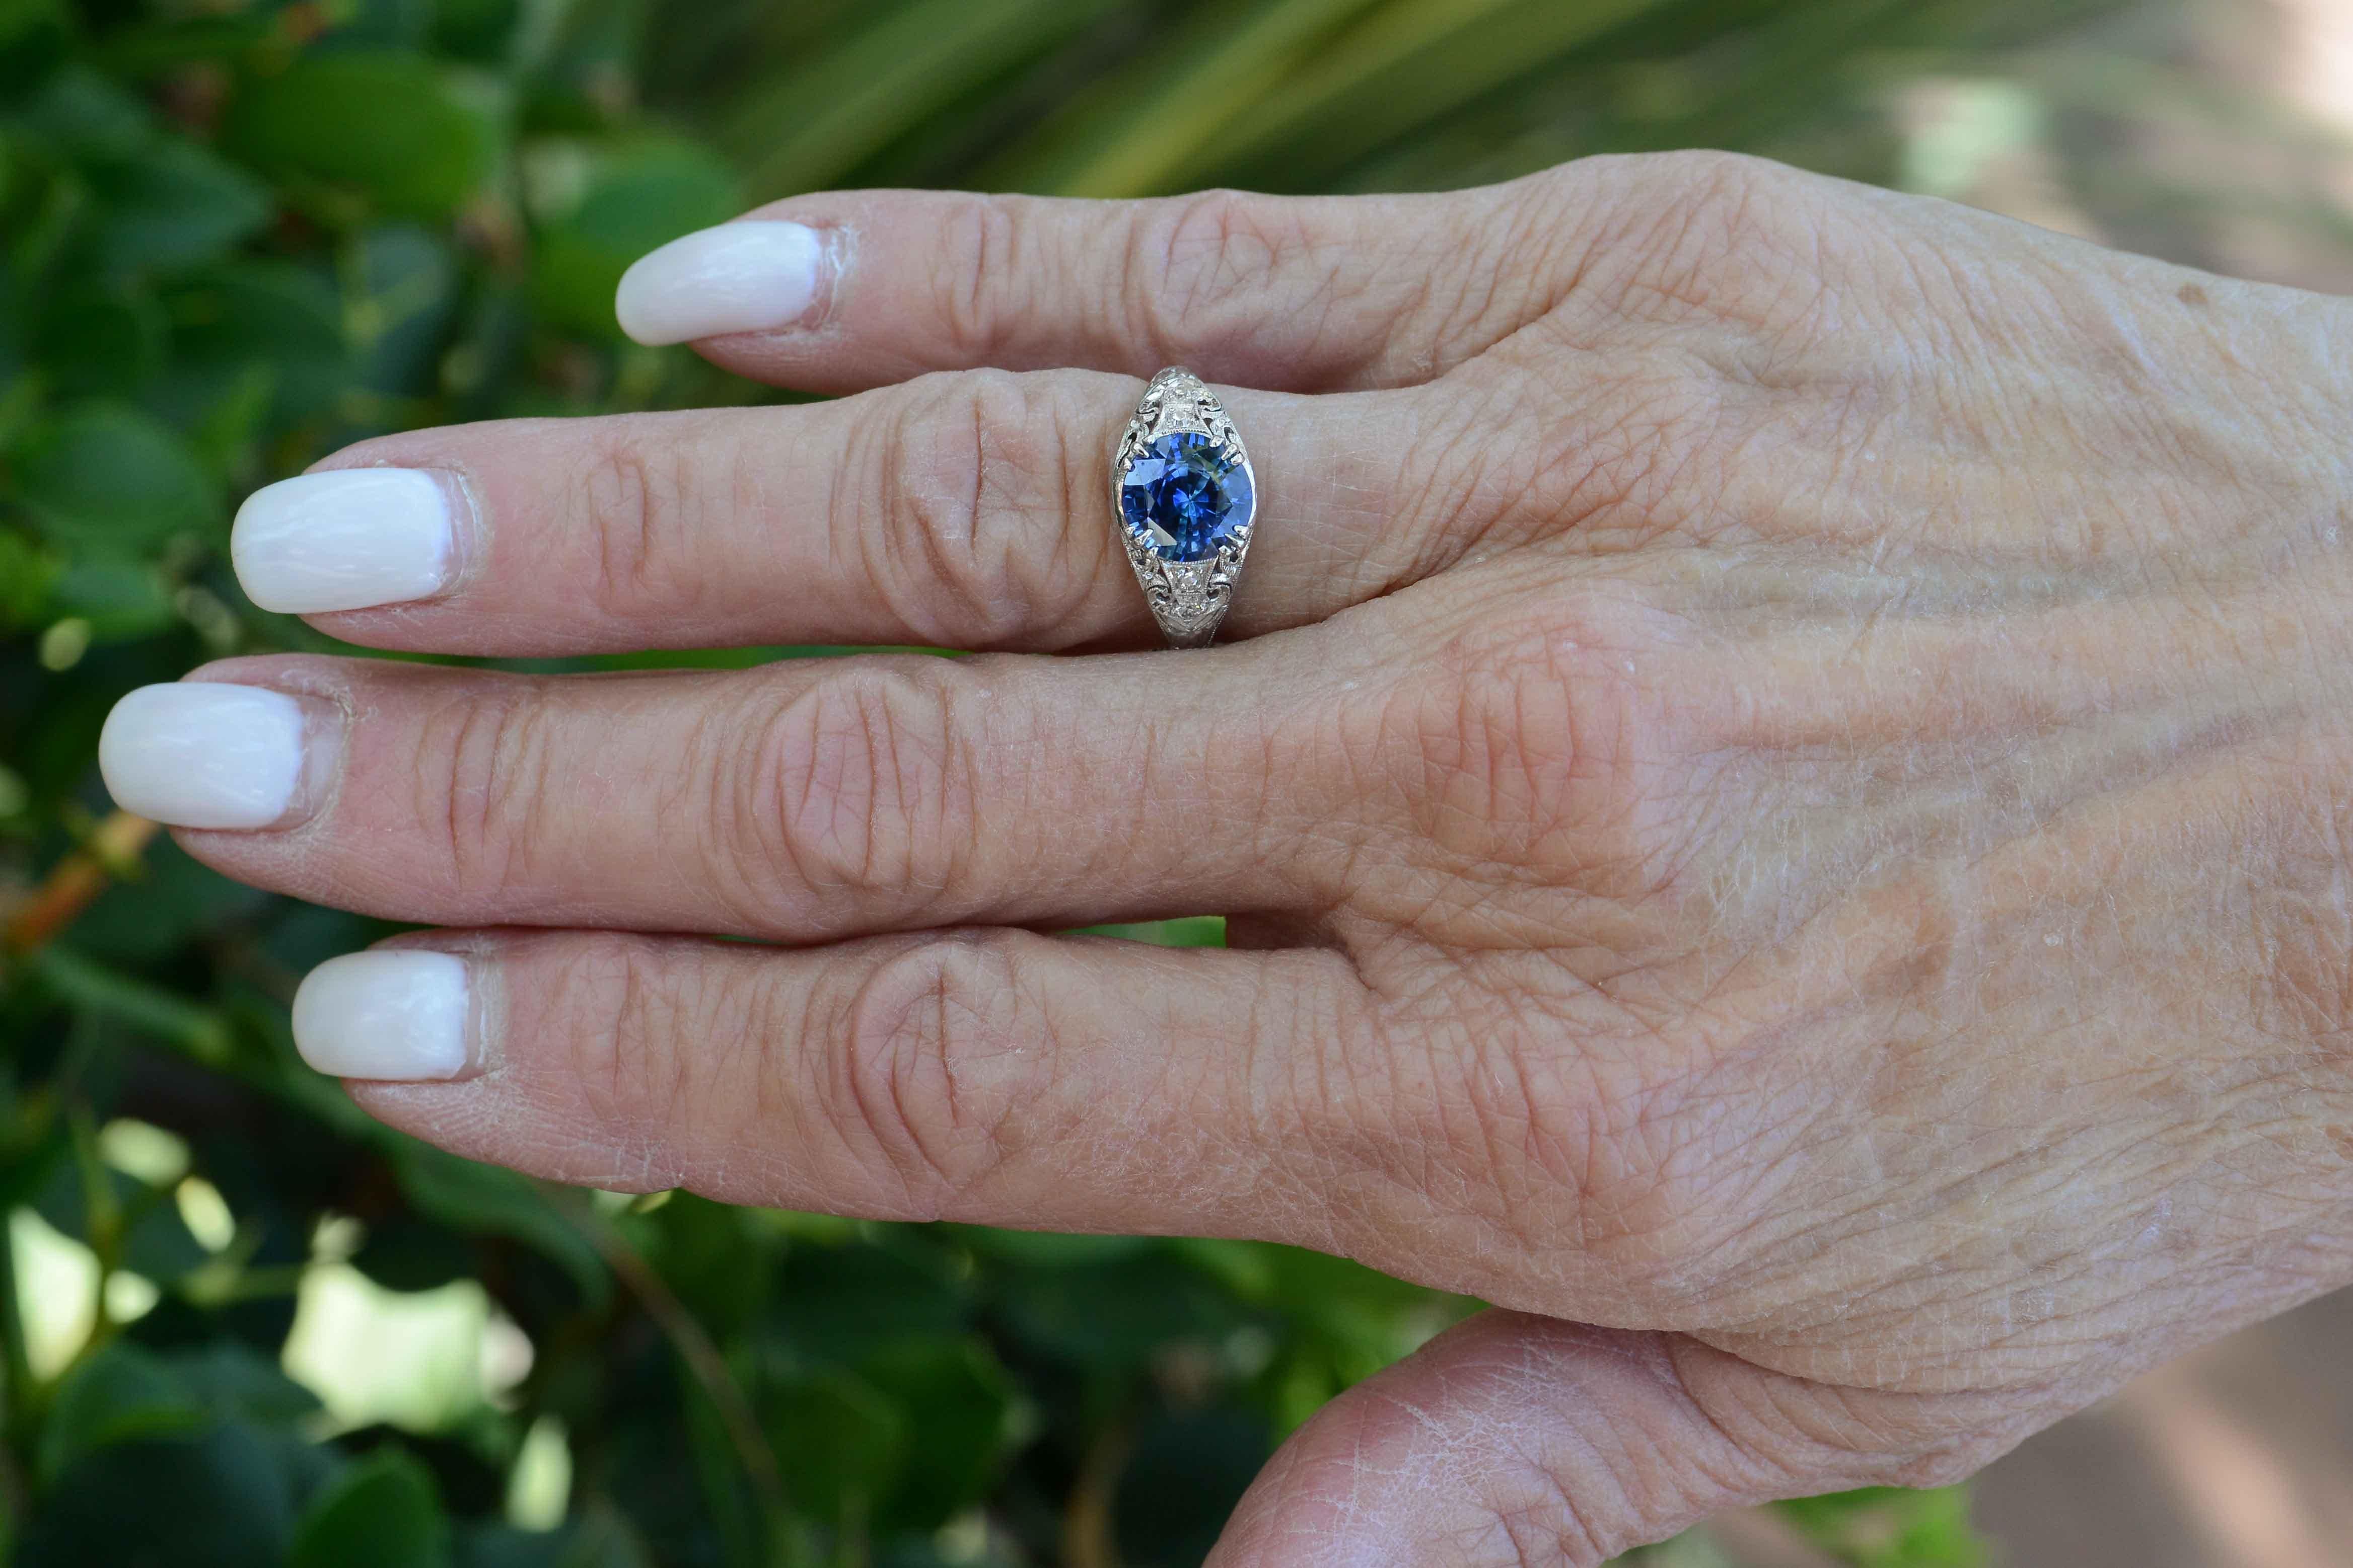 The vivid, intense royal blue color of this 2.64 carat gemstone only tells part of the story. An enchanting Art Deco Edwardian era heirloom circa 1915, the platinum setting draped in filigree, hand engraving and milgrain makes for a highly coveted